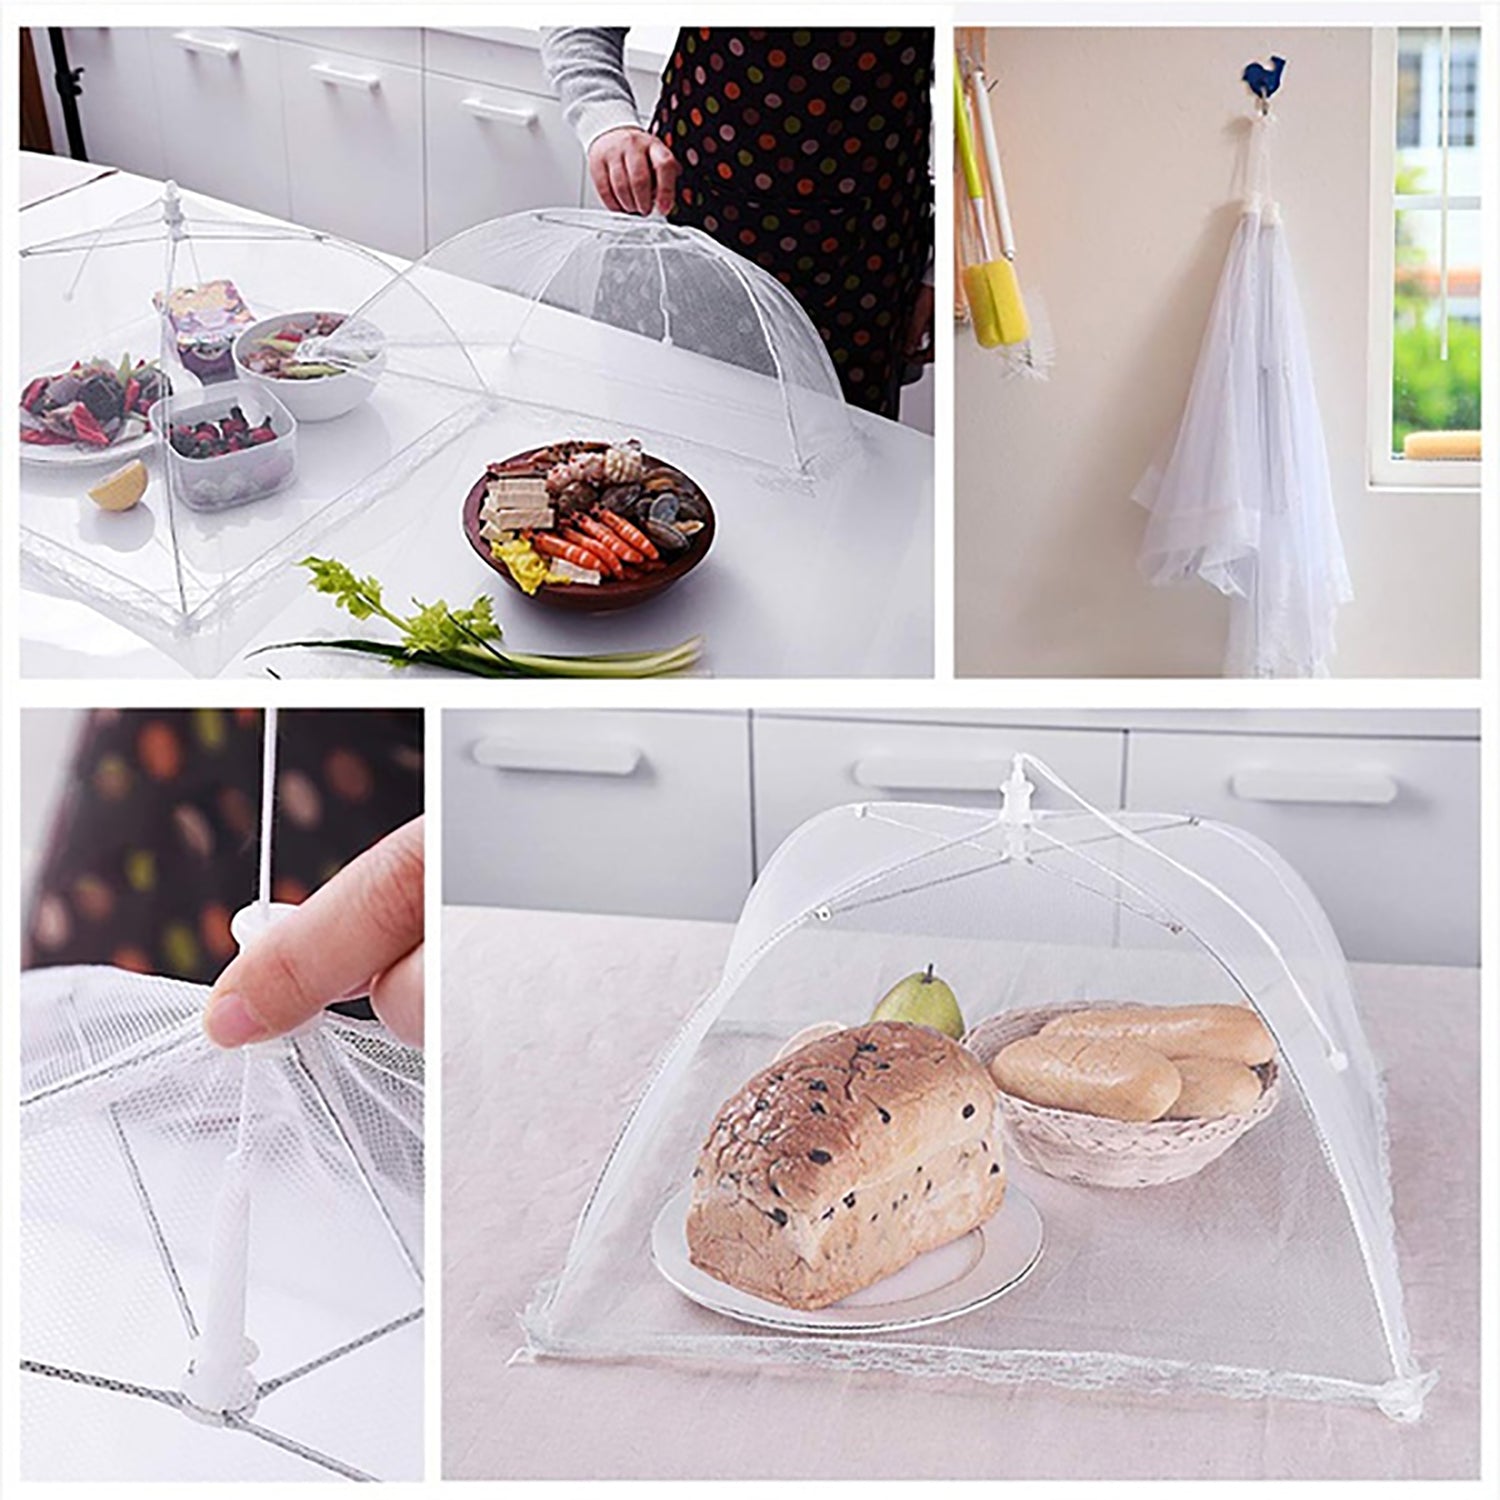 Food Covers Mesh Net Kitchen Umbrella Practical Home Using Food Cover (Multicolour)